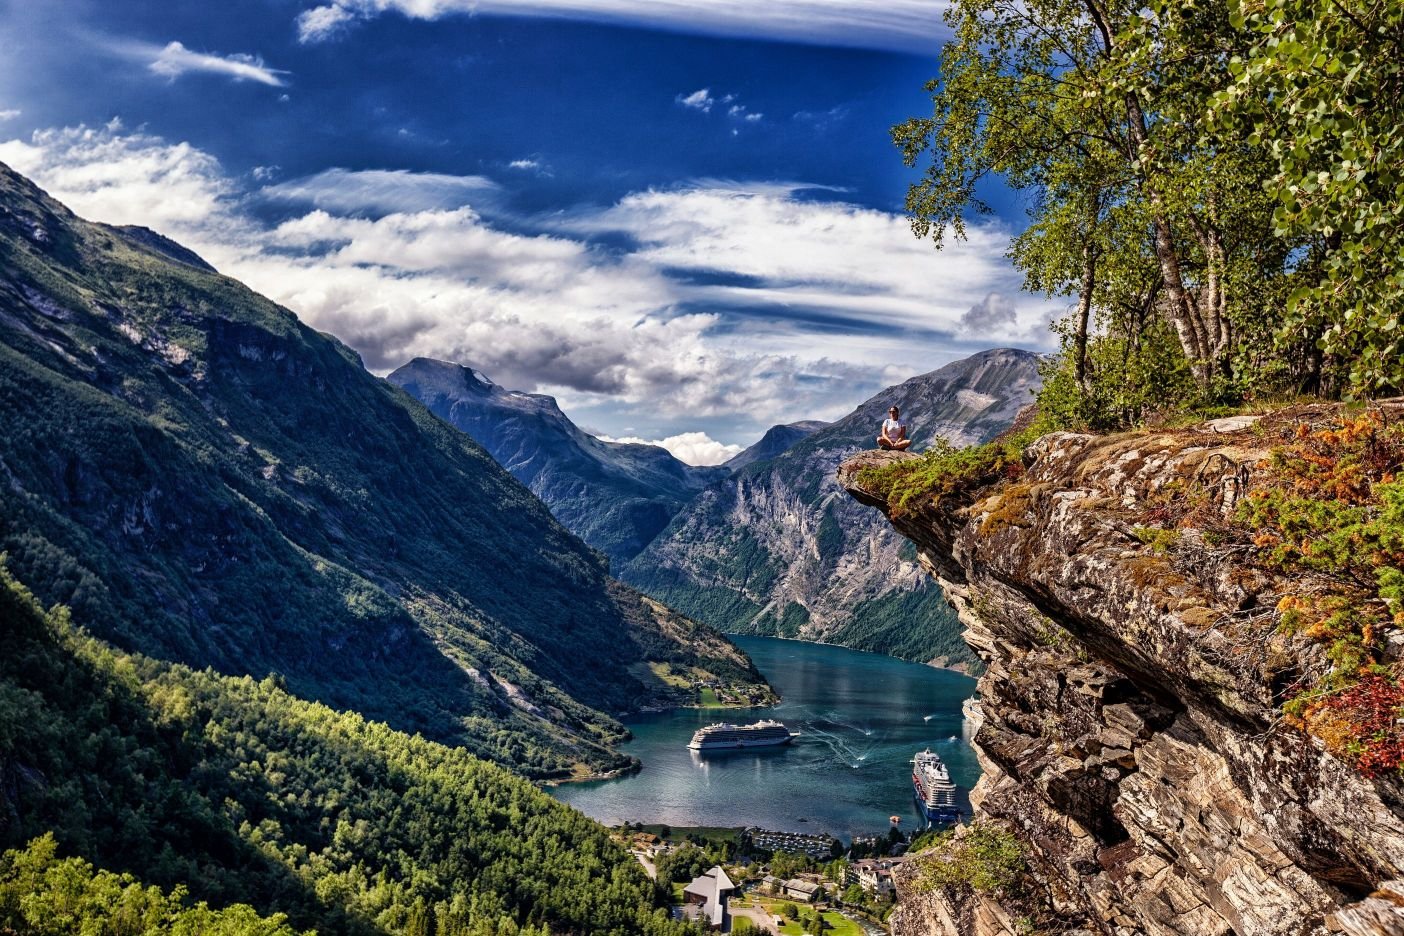 A stunning view of Geiranger and Geirangerfjord